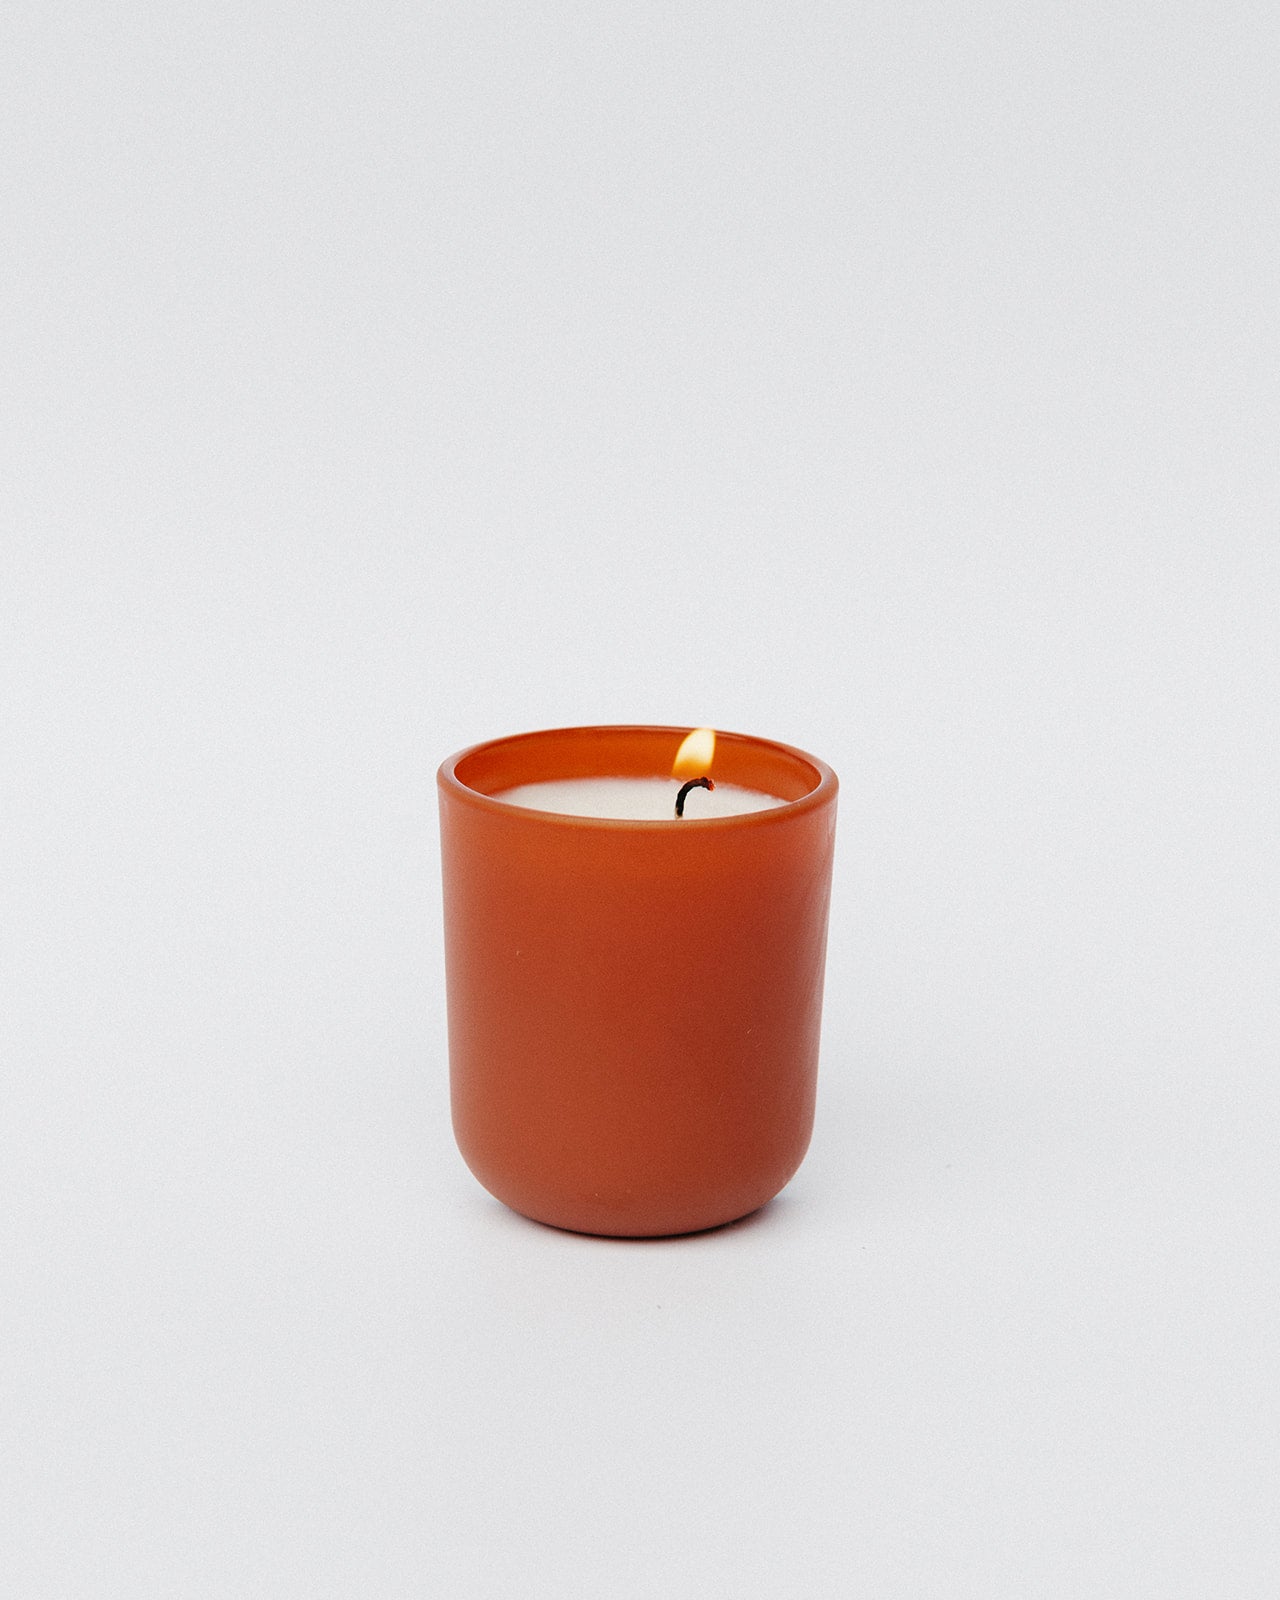 Old Fashioned Soy Candle